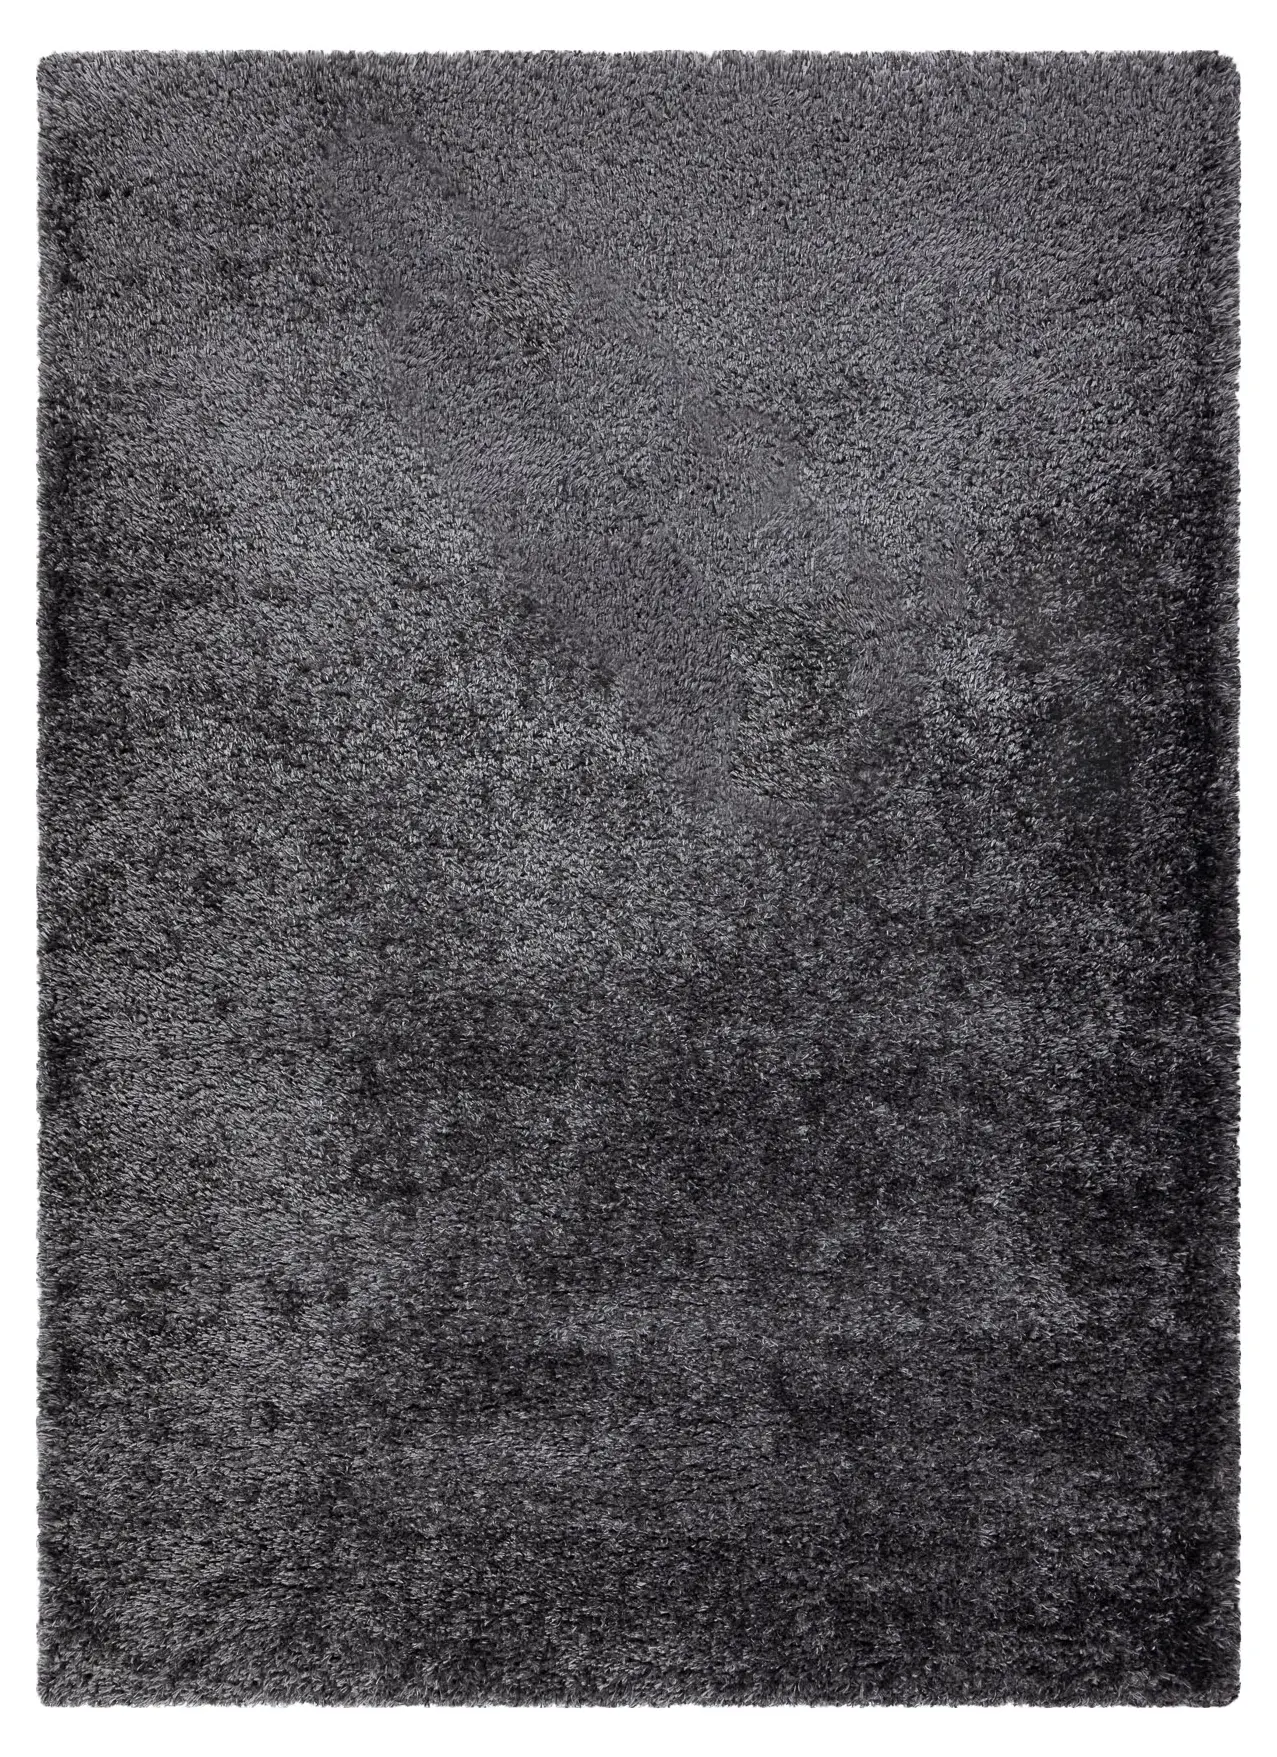 Gris Fluffy Shaggy Tapis